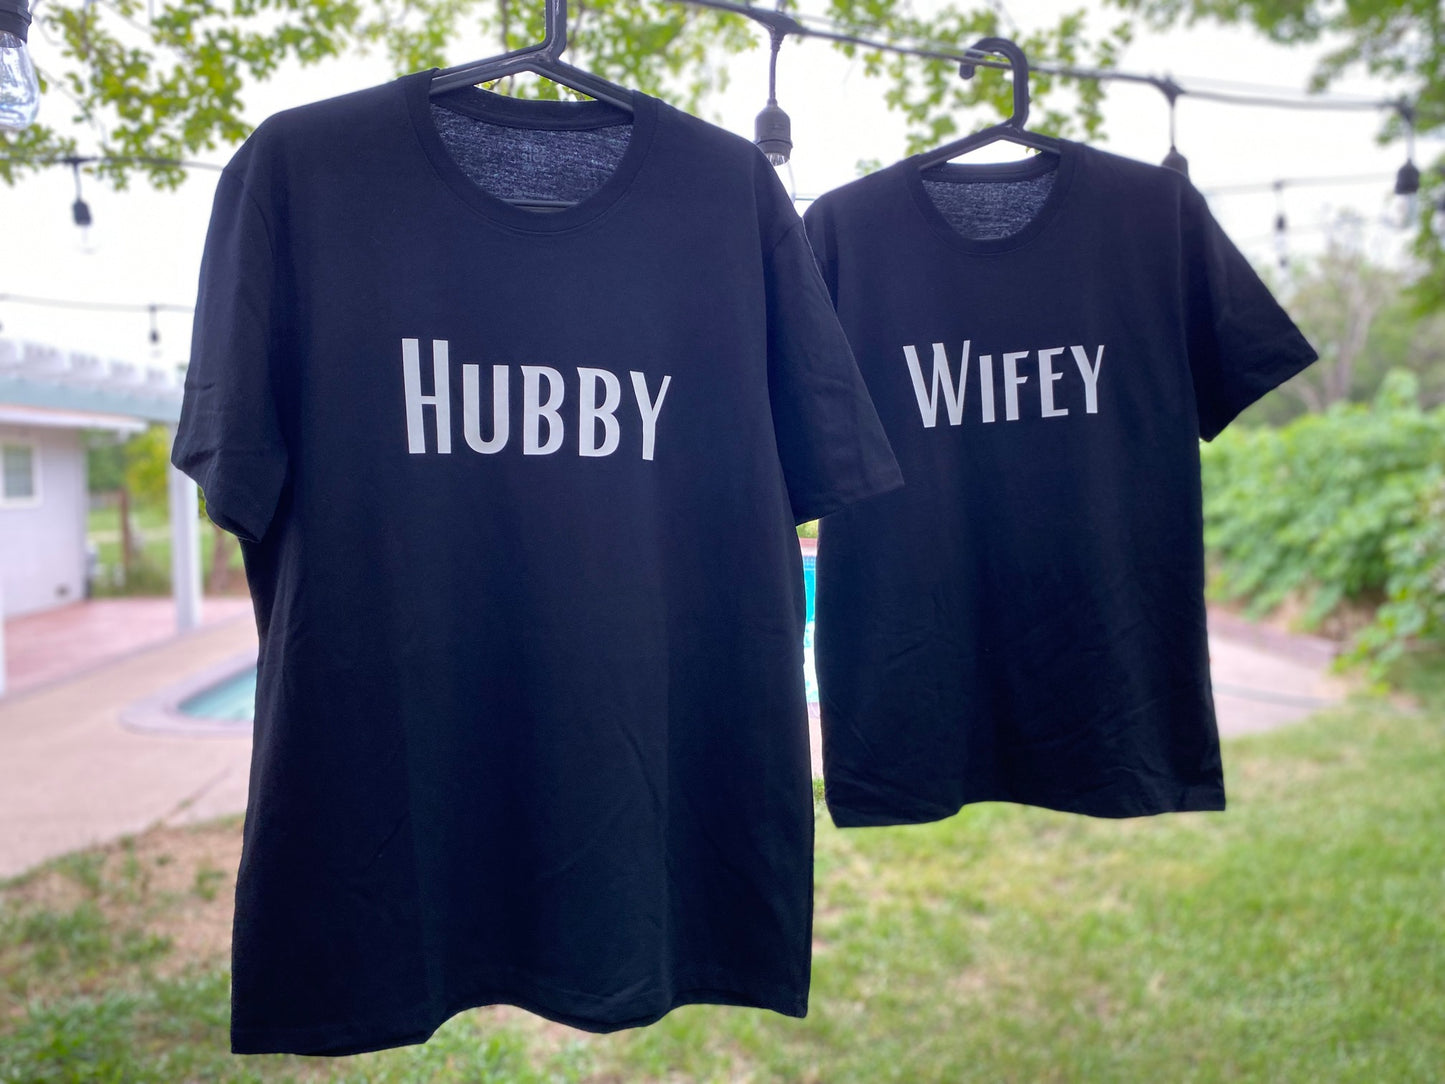 Hubby and Wifey Black Matching Sustainably Made T-Shirts